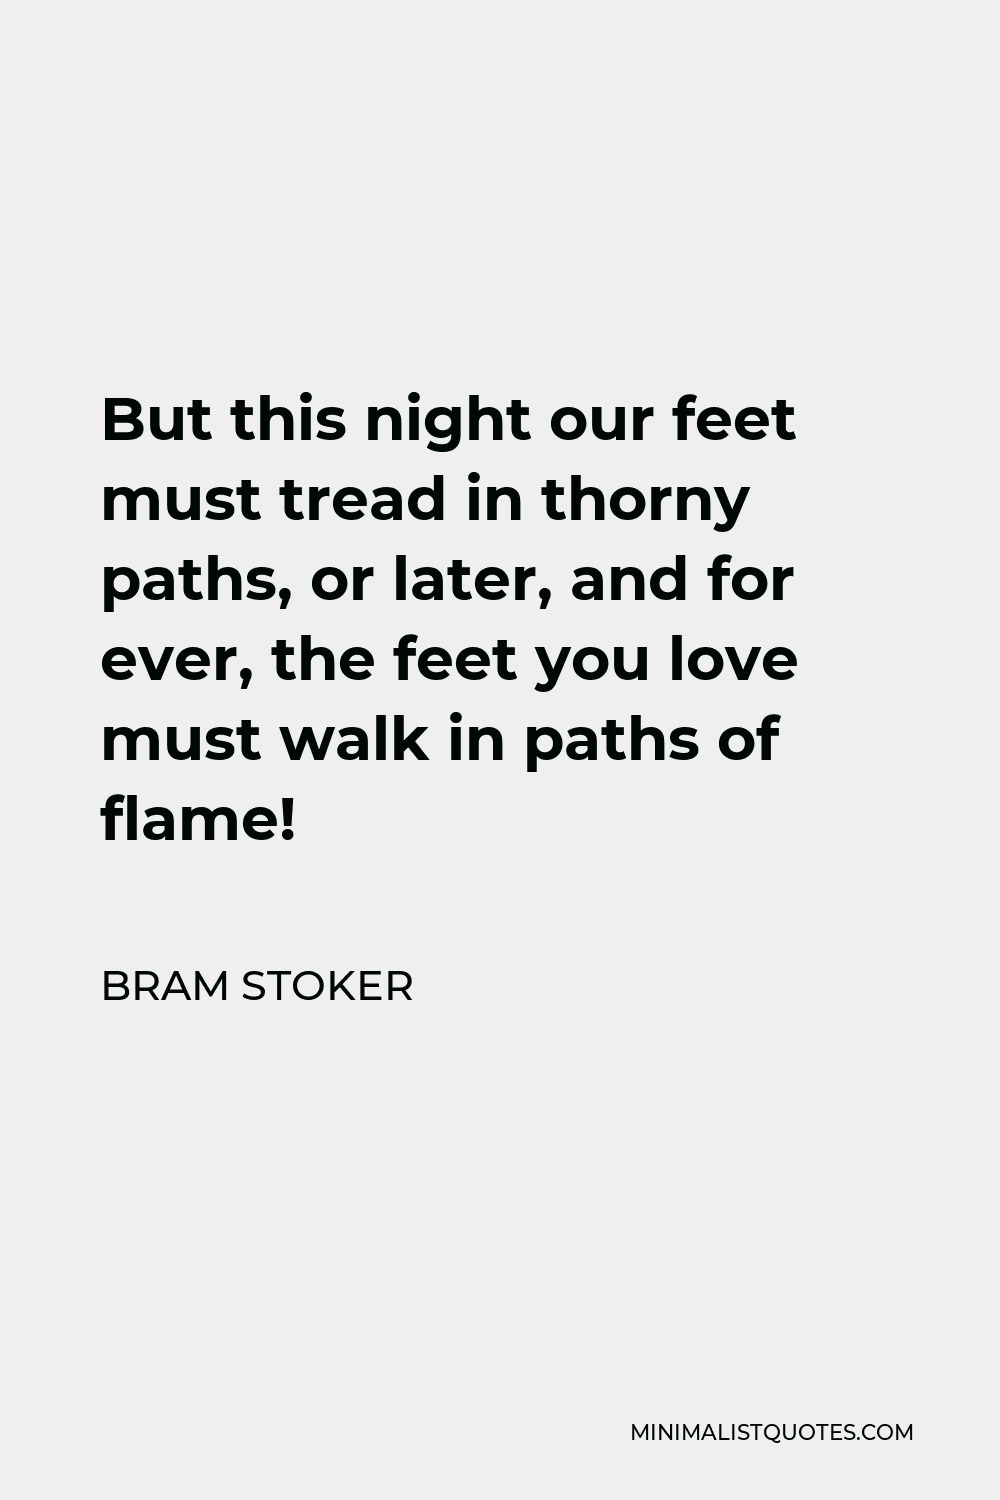 Bram Stoker Quote - But this night our feet must tread in thorny paths, or later, and for ever, the feet you love must walk in paths of flame!